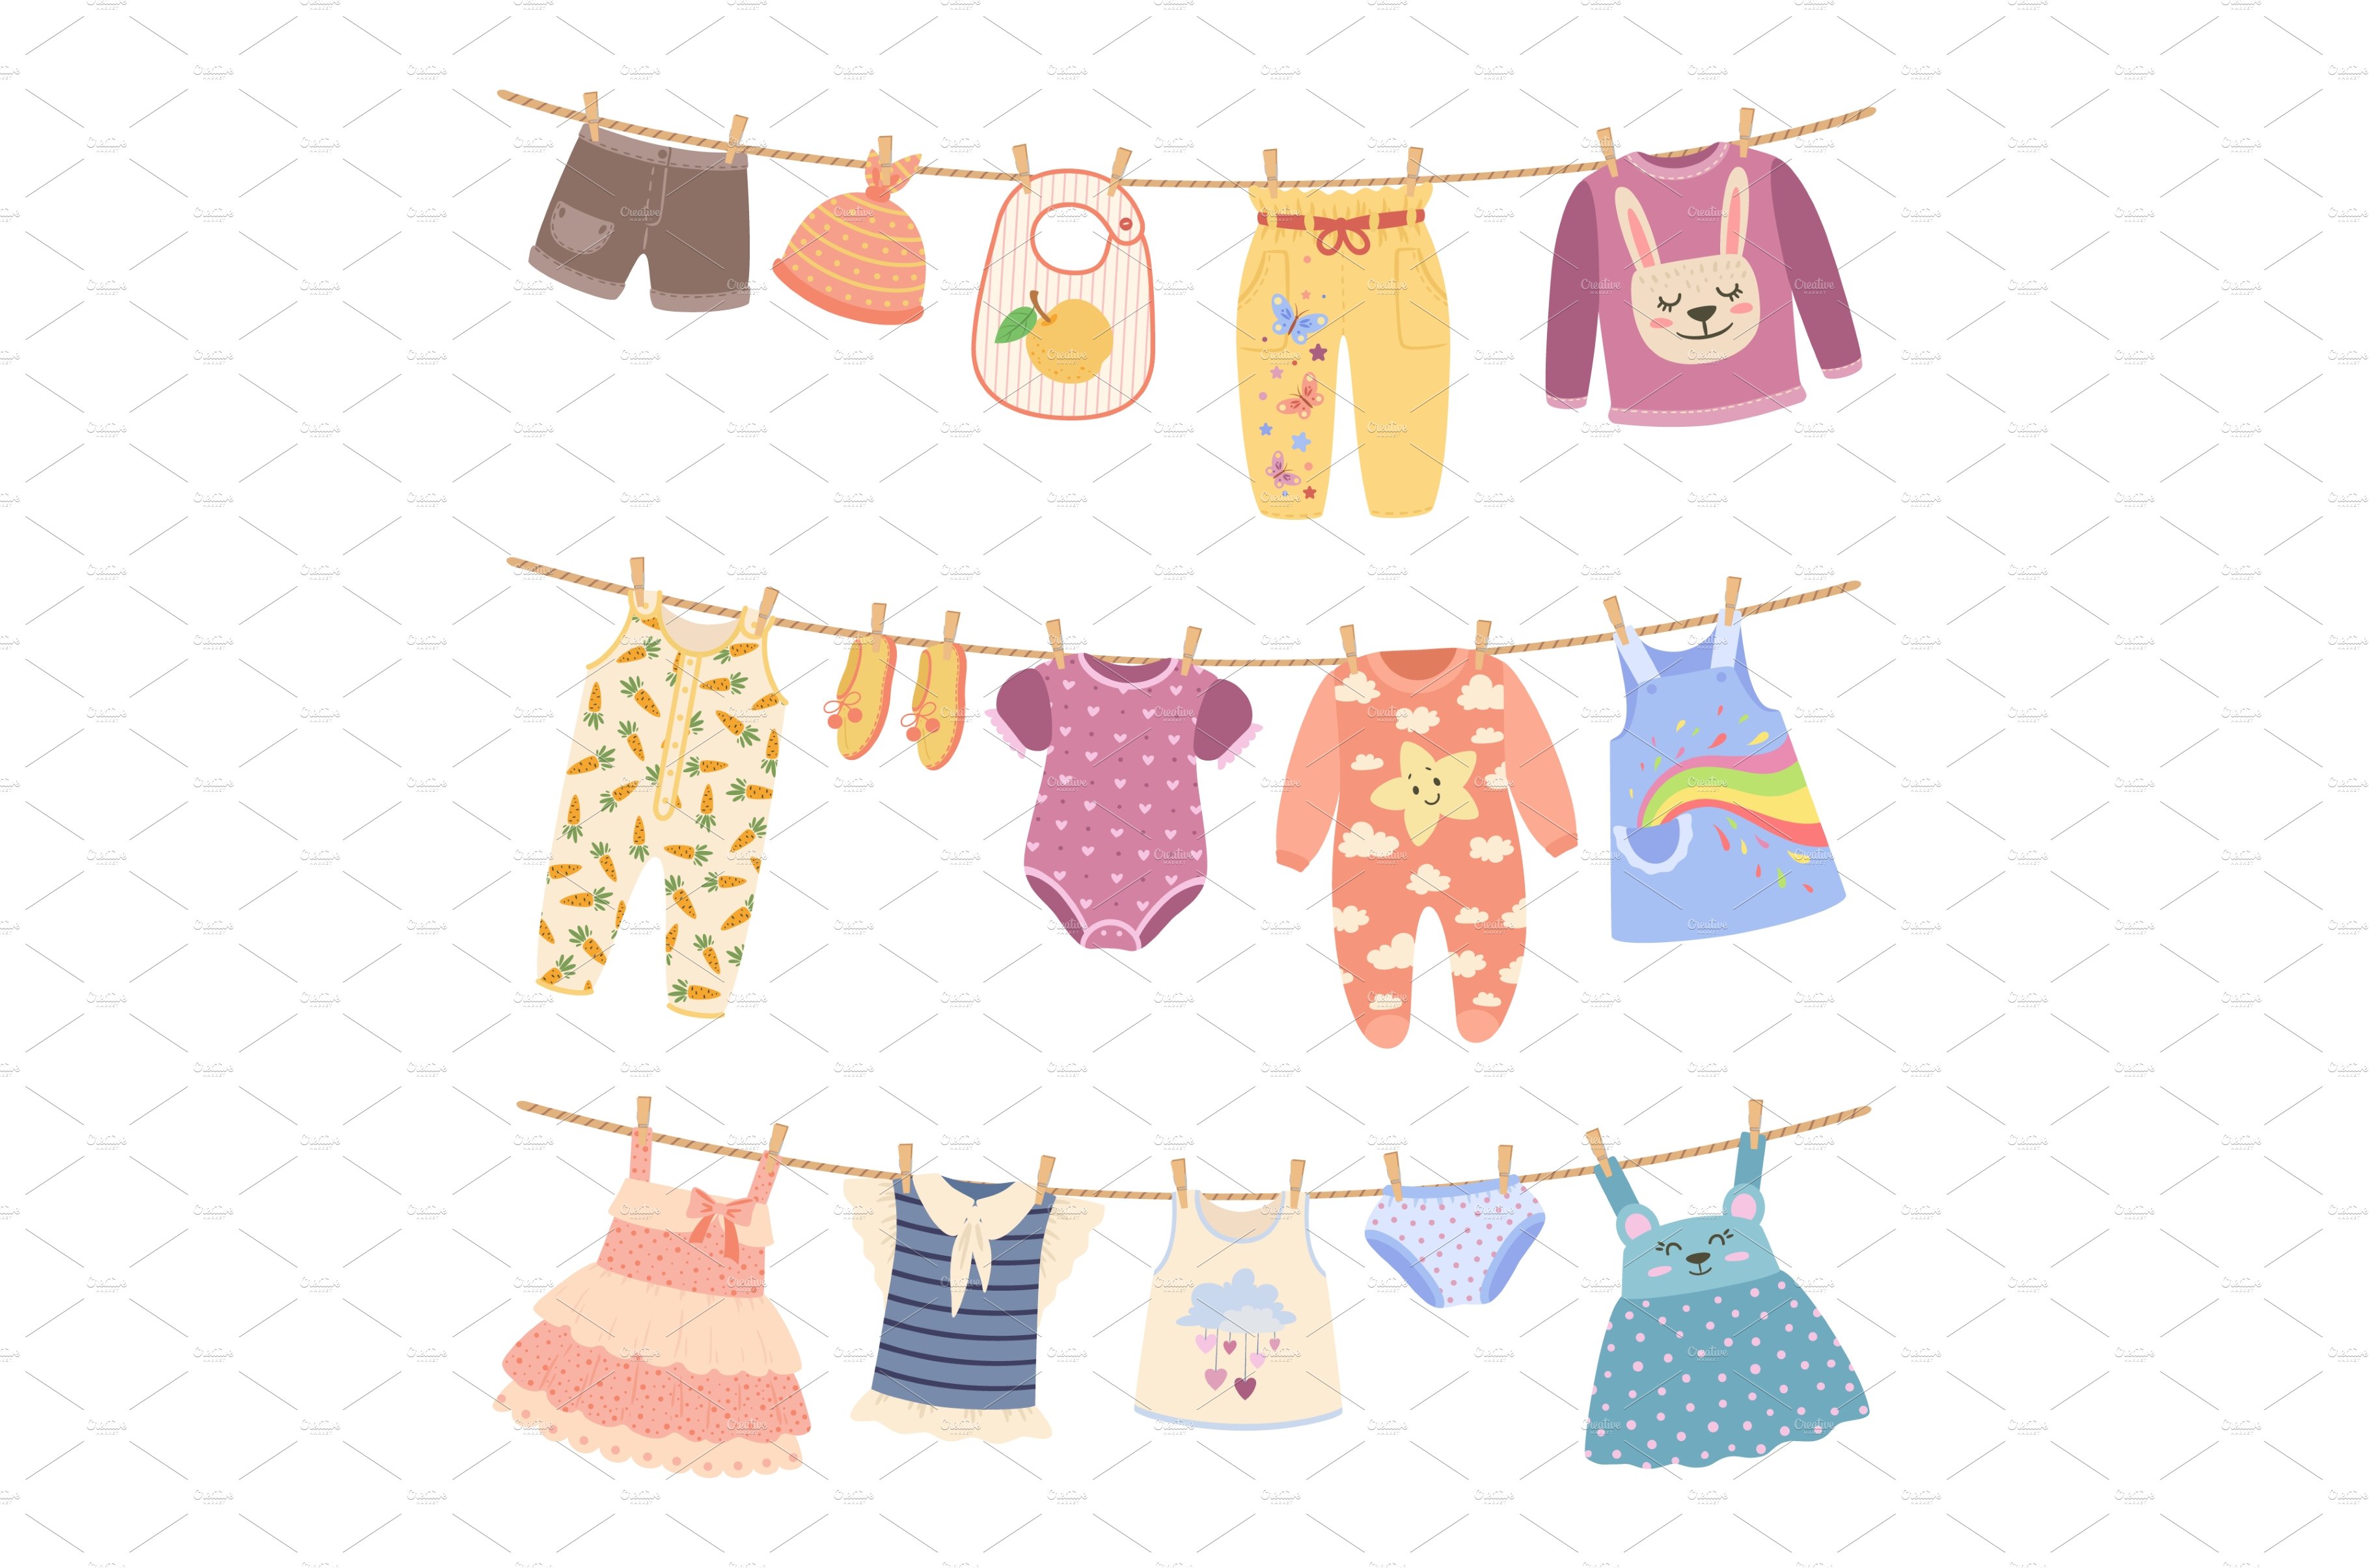 Kids clothes on ropes with cover image.